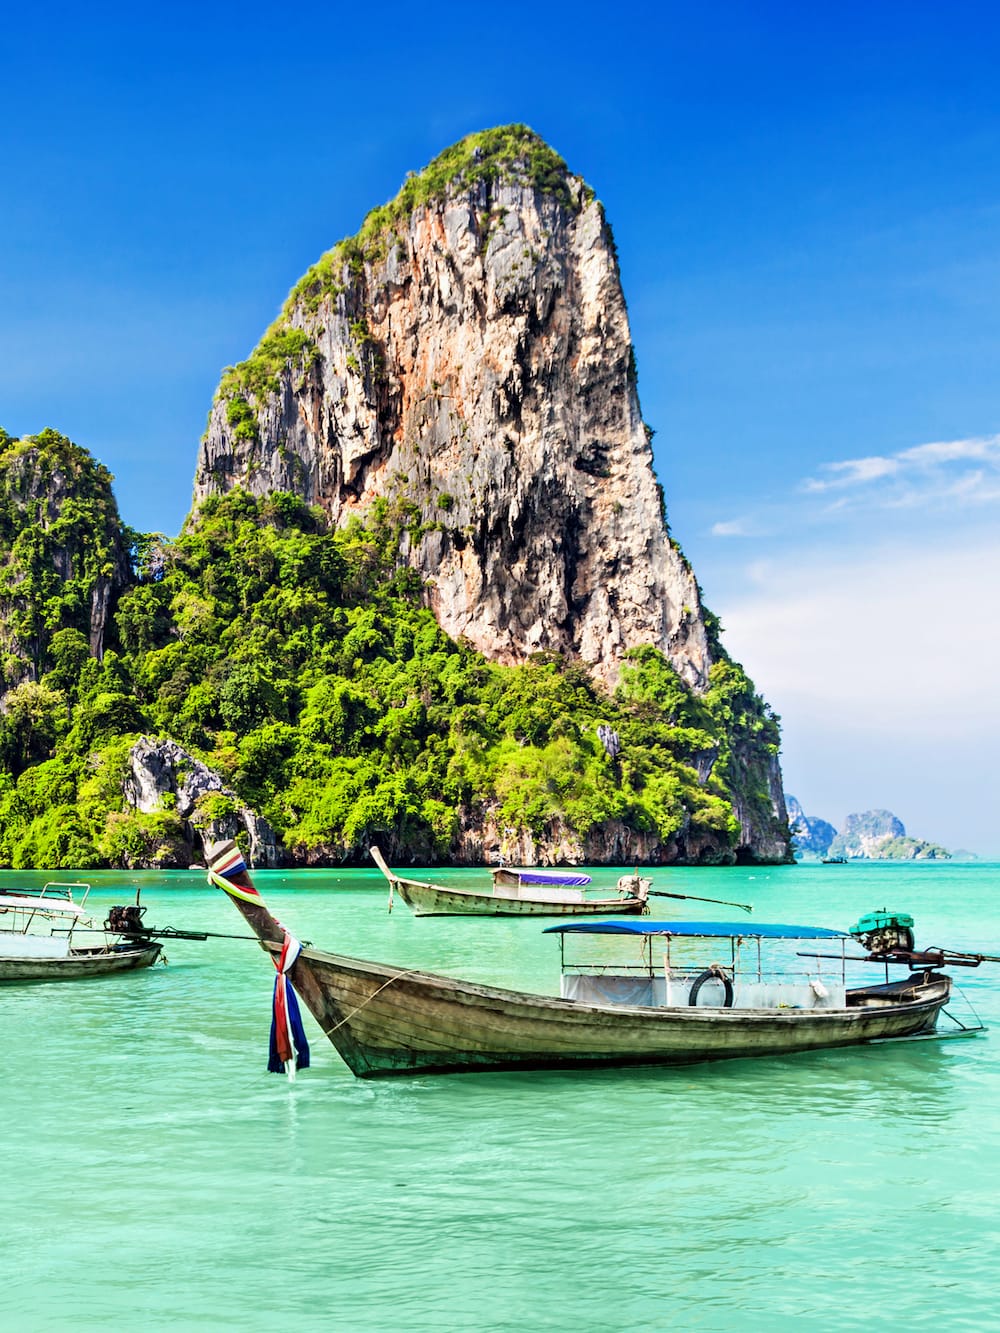 random places to visit in thailand